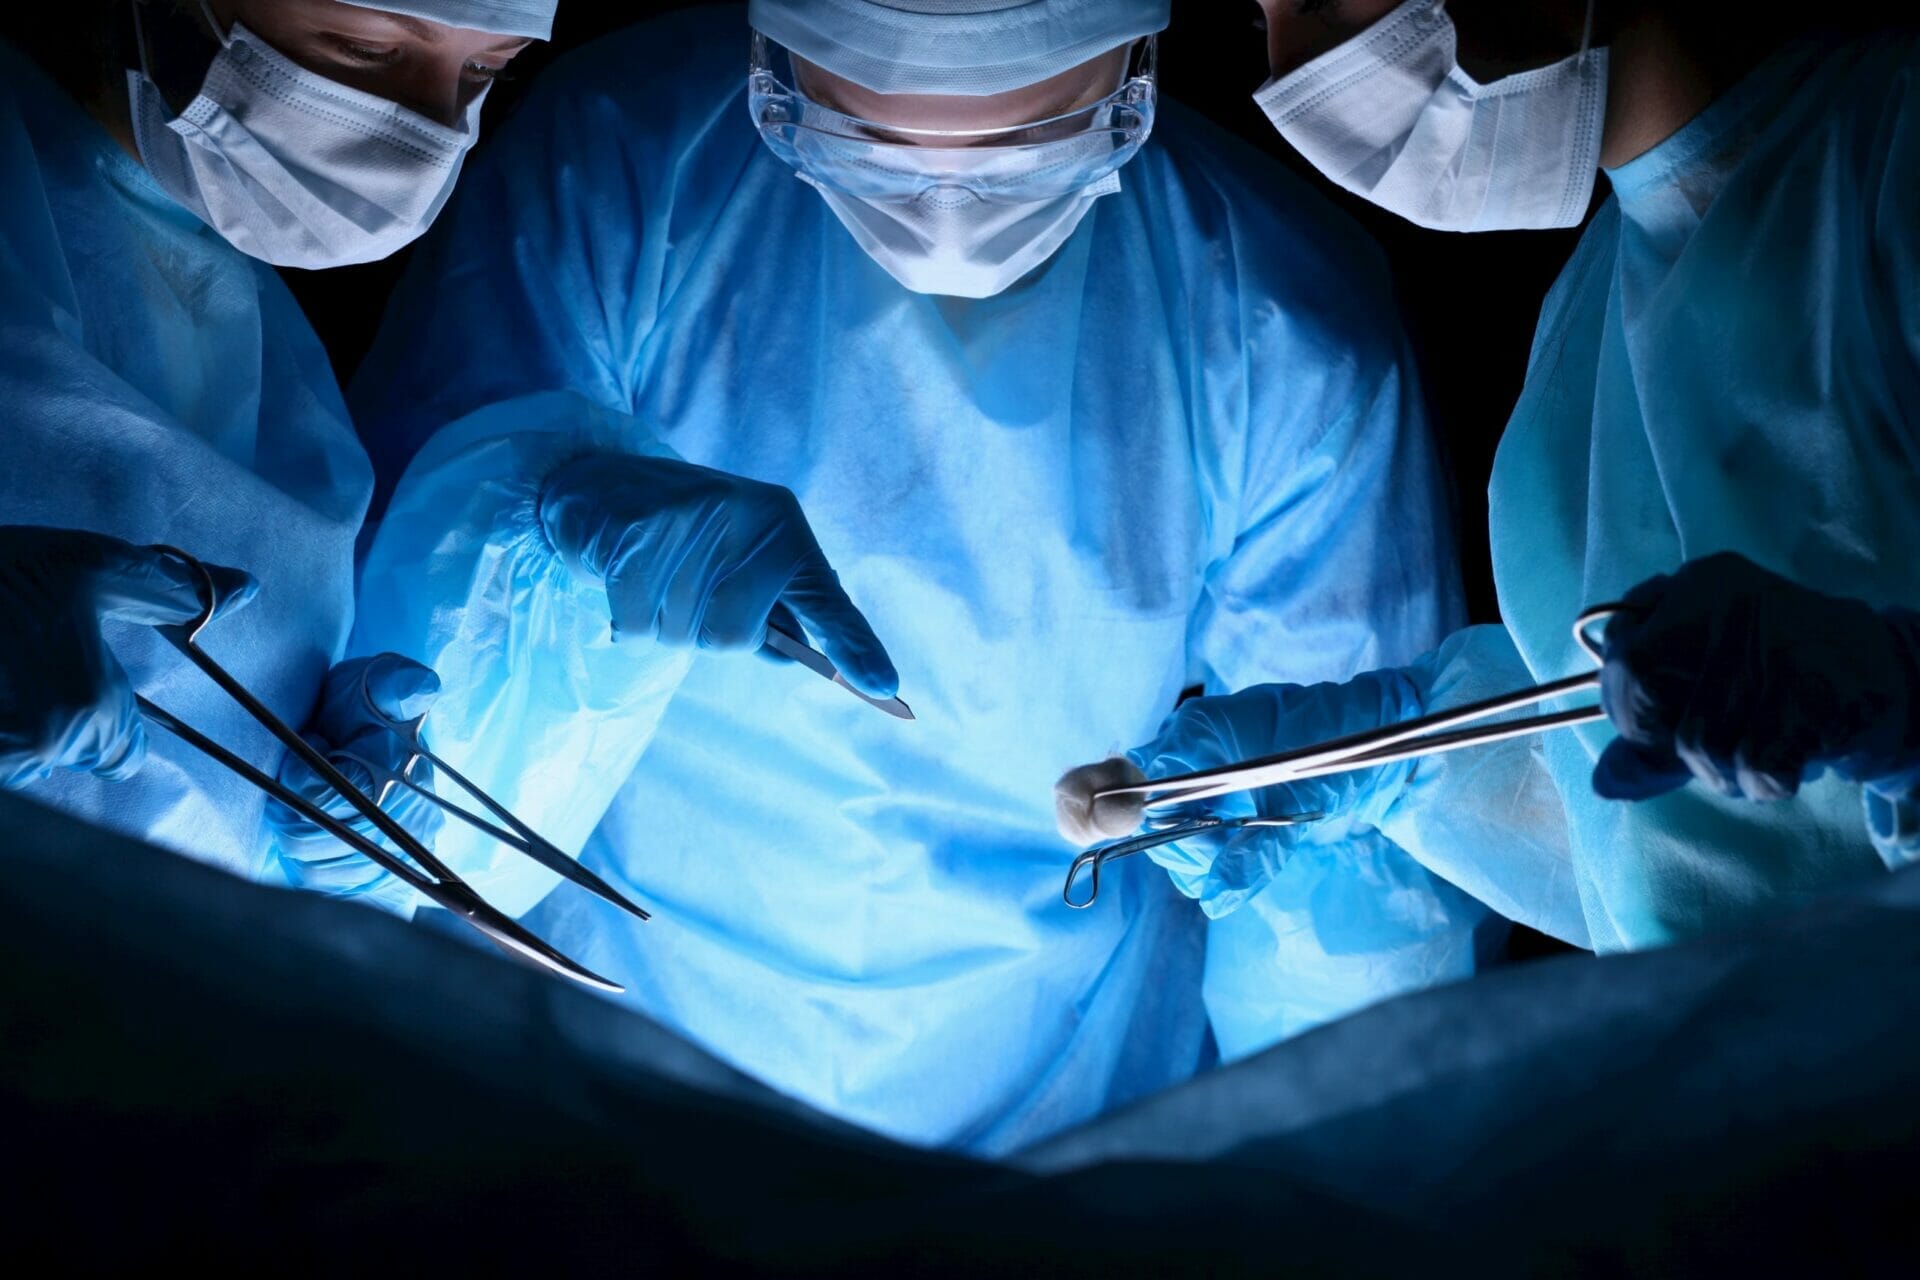 3 surgeons carrying out surgery